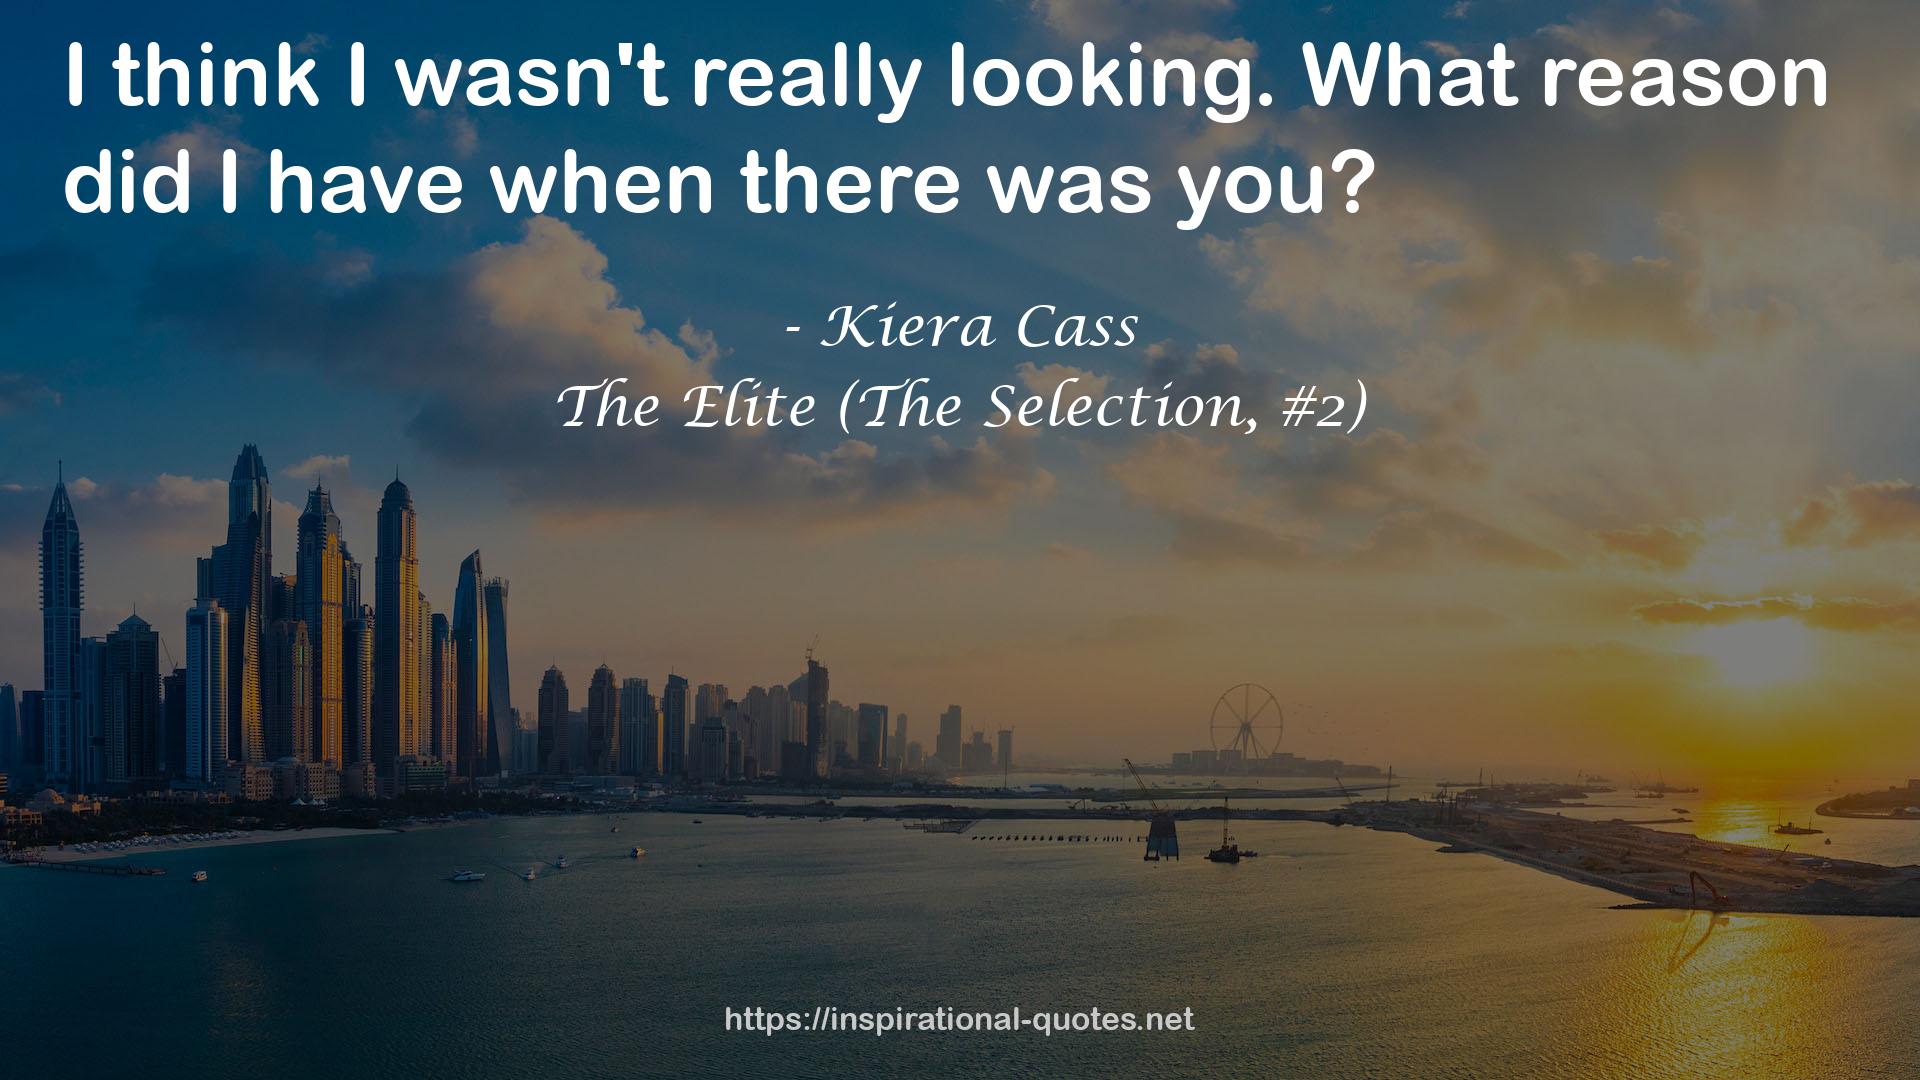 The Elite (The Selection, #2) QUOTES